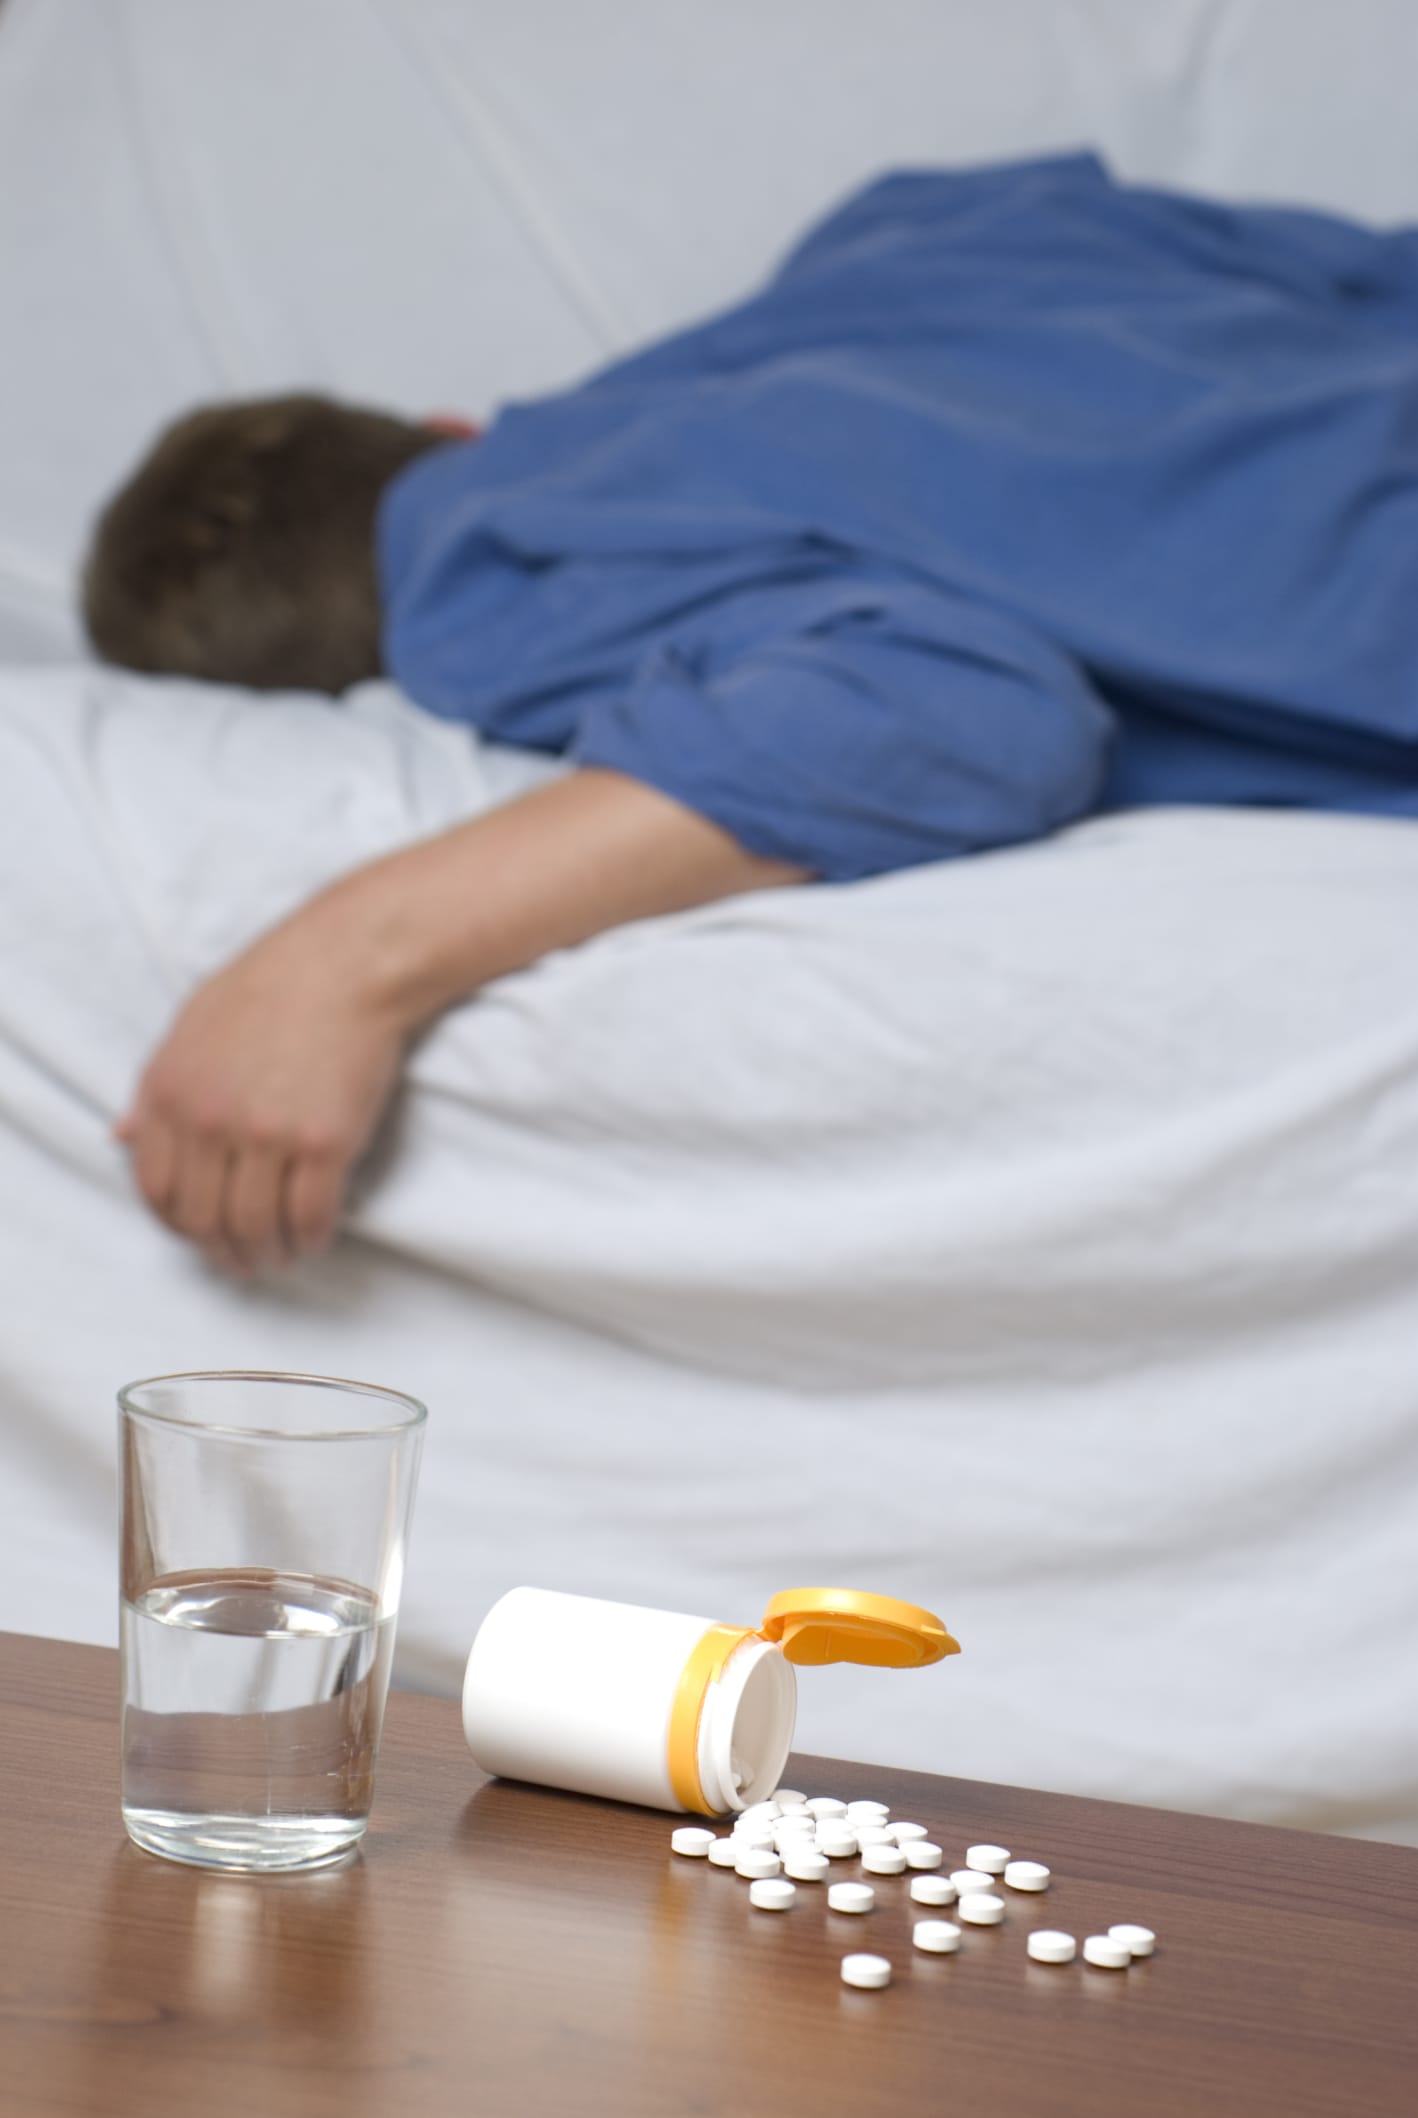 Can Sleeping Pills Help With Anxiety?